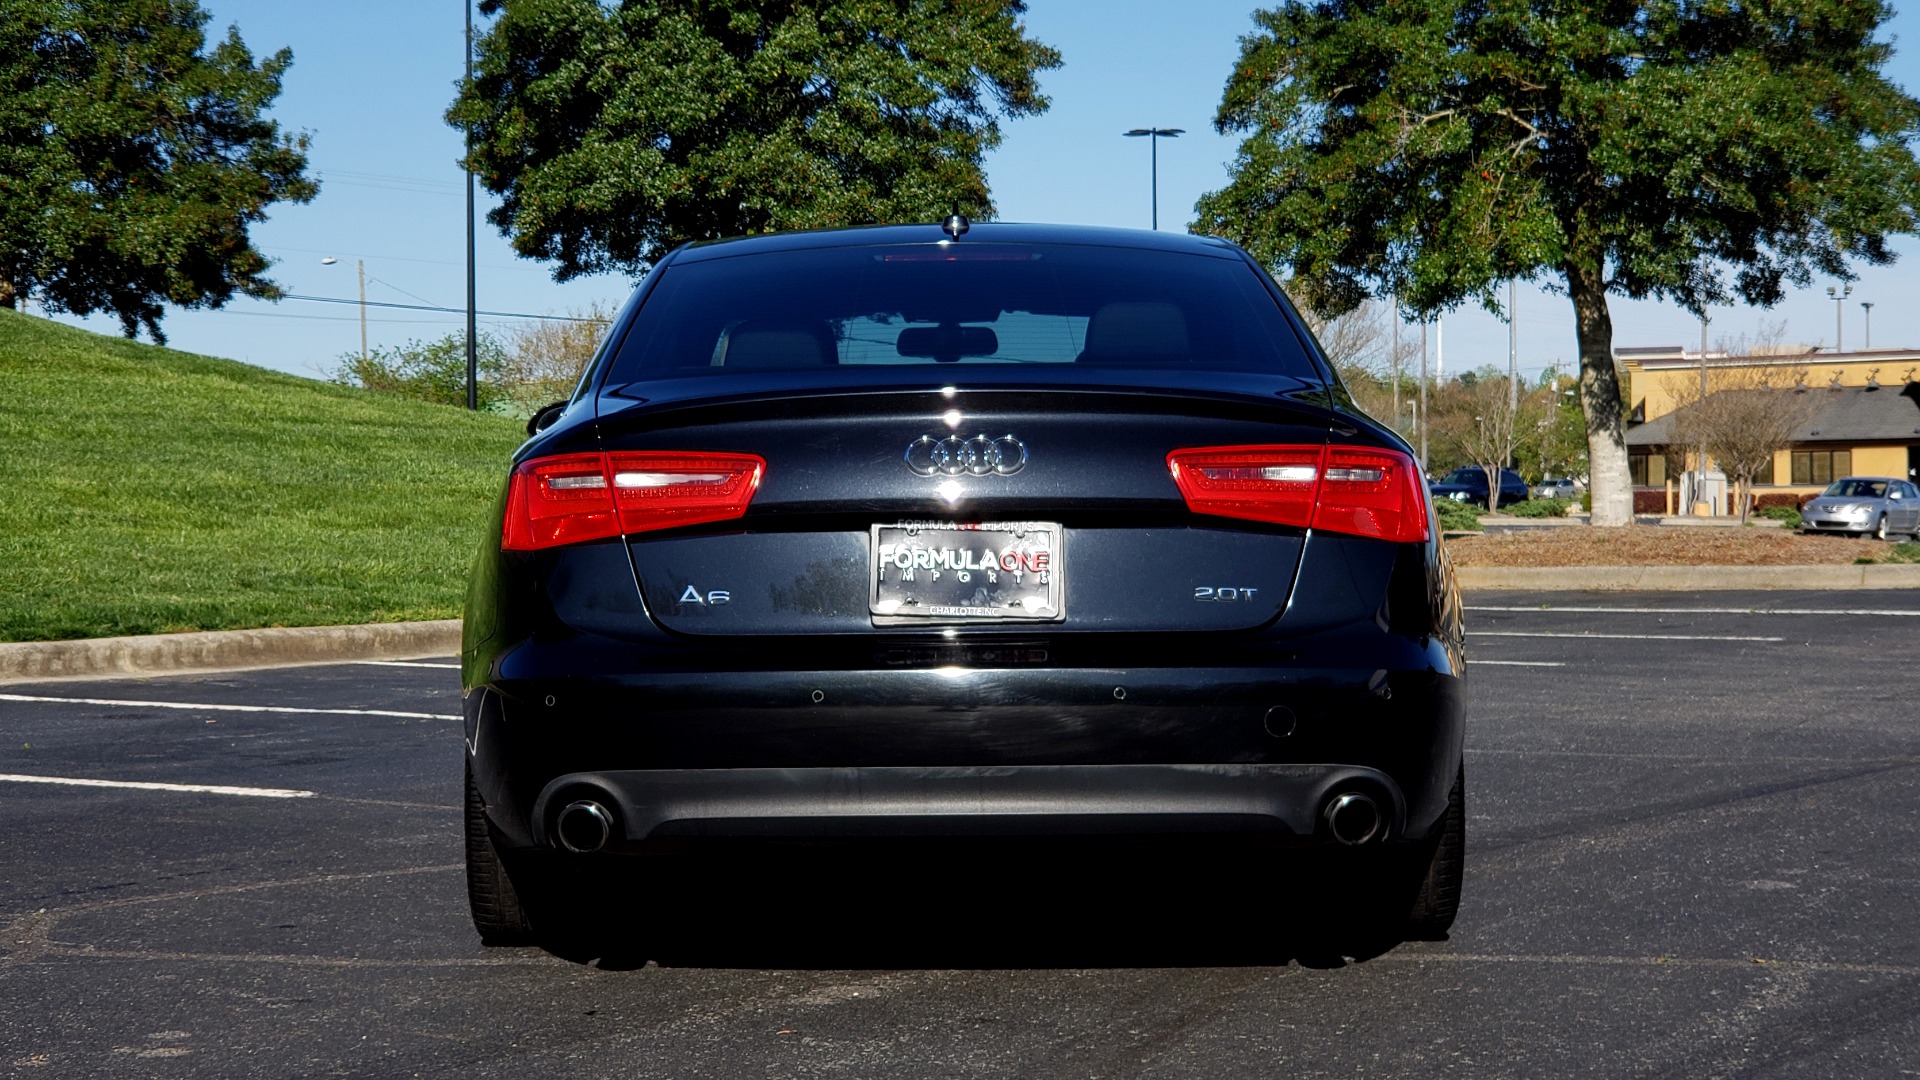 Used 2012 Audi A6 2.0T PREMIUM PLUS / NAV / SNRF / CVT TRANS / REARVIEW for sale Sold at Formula Imports in Charlotte NC 28227 20